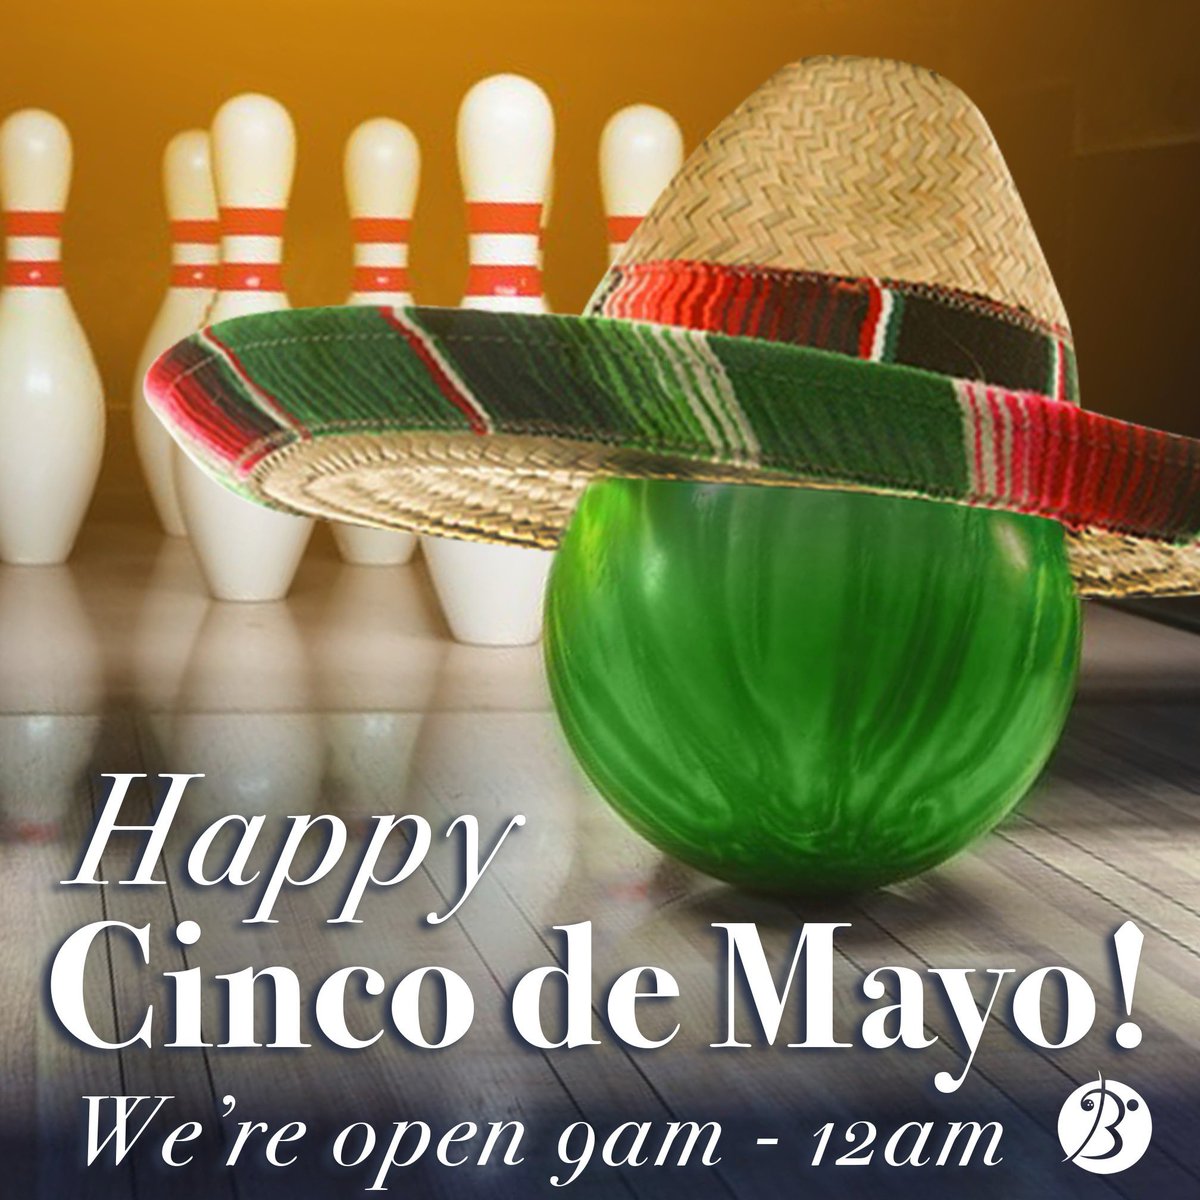 No time for siesta... it's time to fiesta! Celebrate #CincoDeMayo on our lanes today from 9am - 12am. 🍻